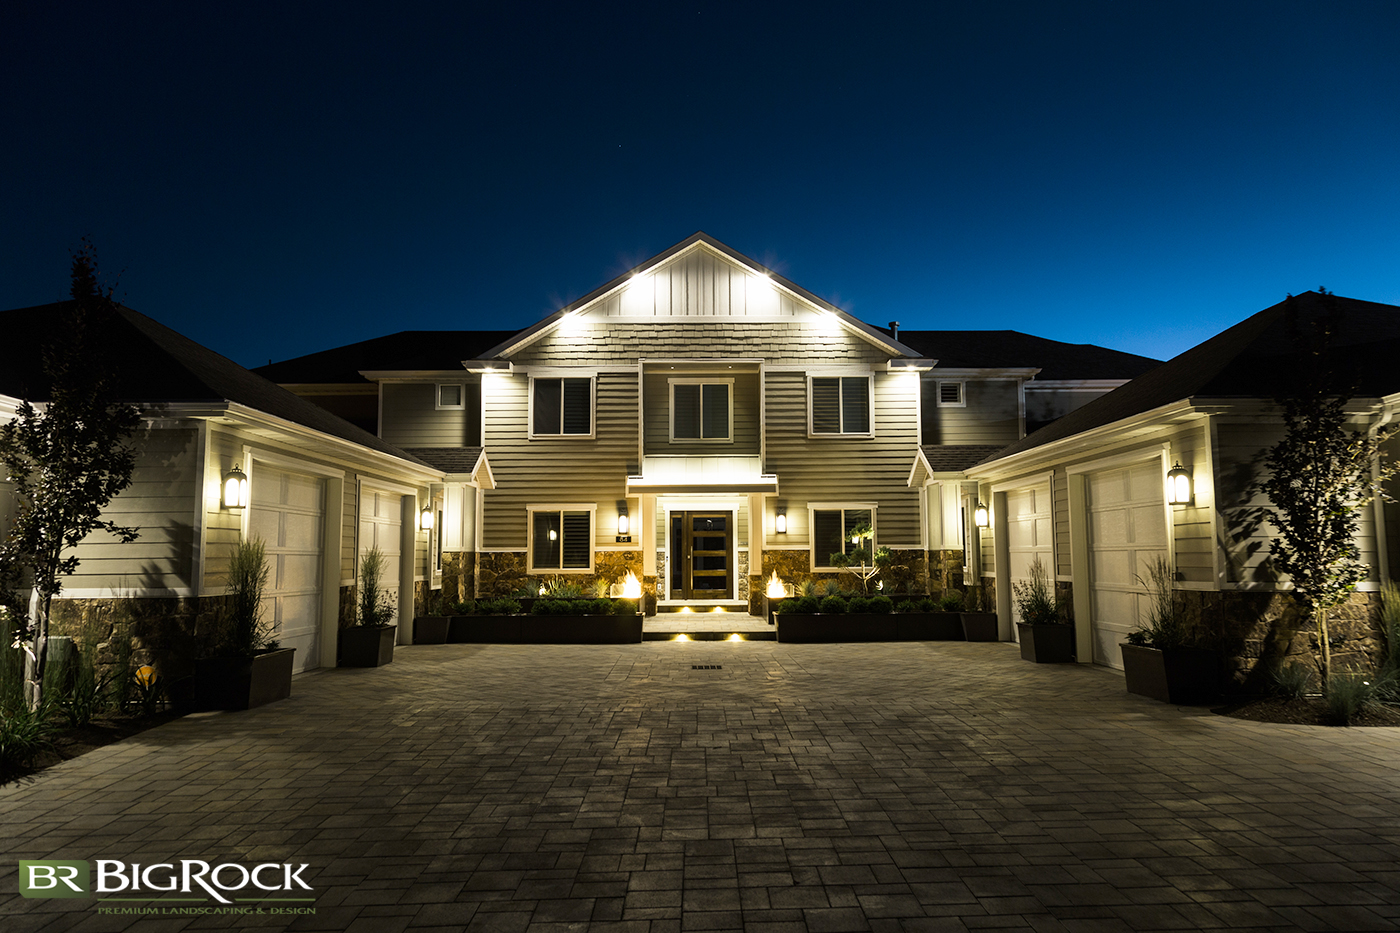 The proper outdoor lighting is essential to a well designed residential landscape. Let Utah's Big Rock Landscaping help design and install the ideal landscape outdoor lighting.